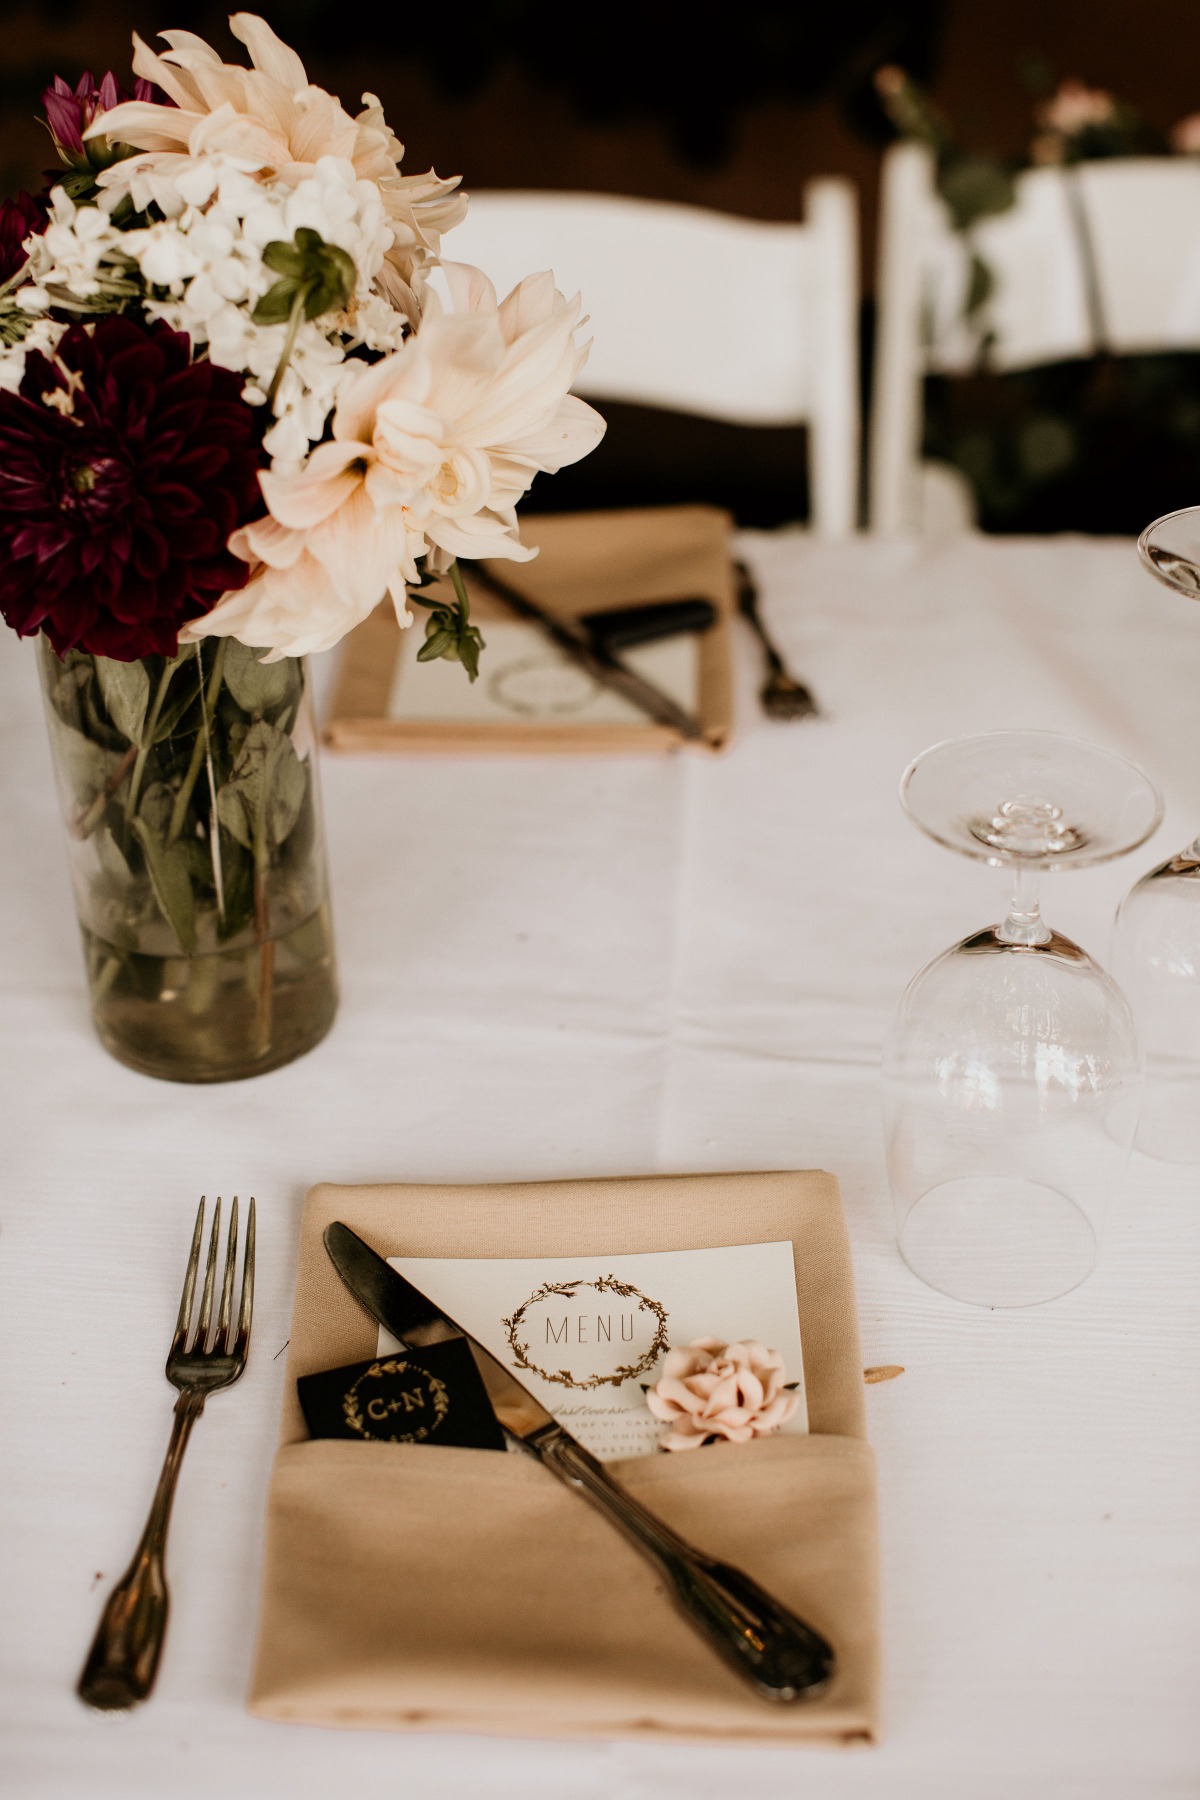 Simple reception place setting